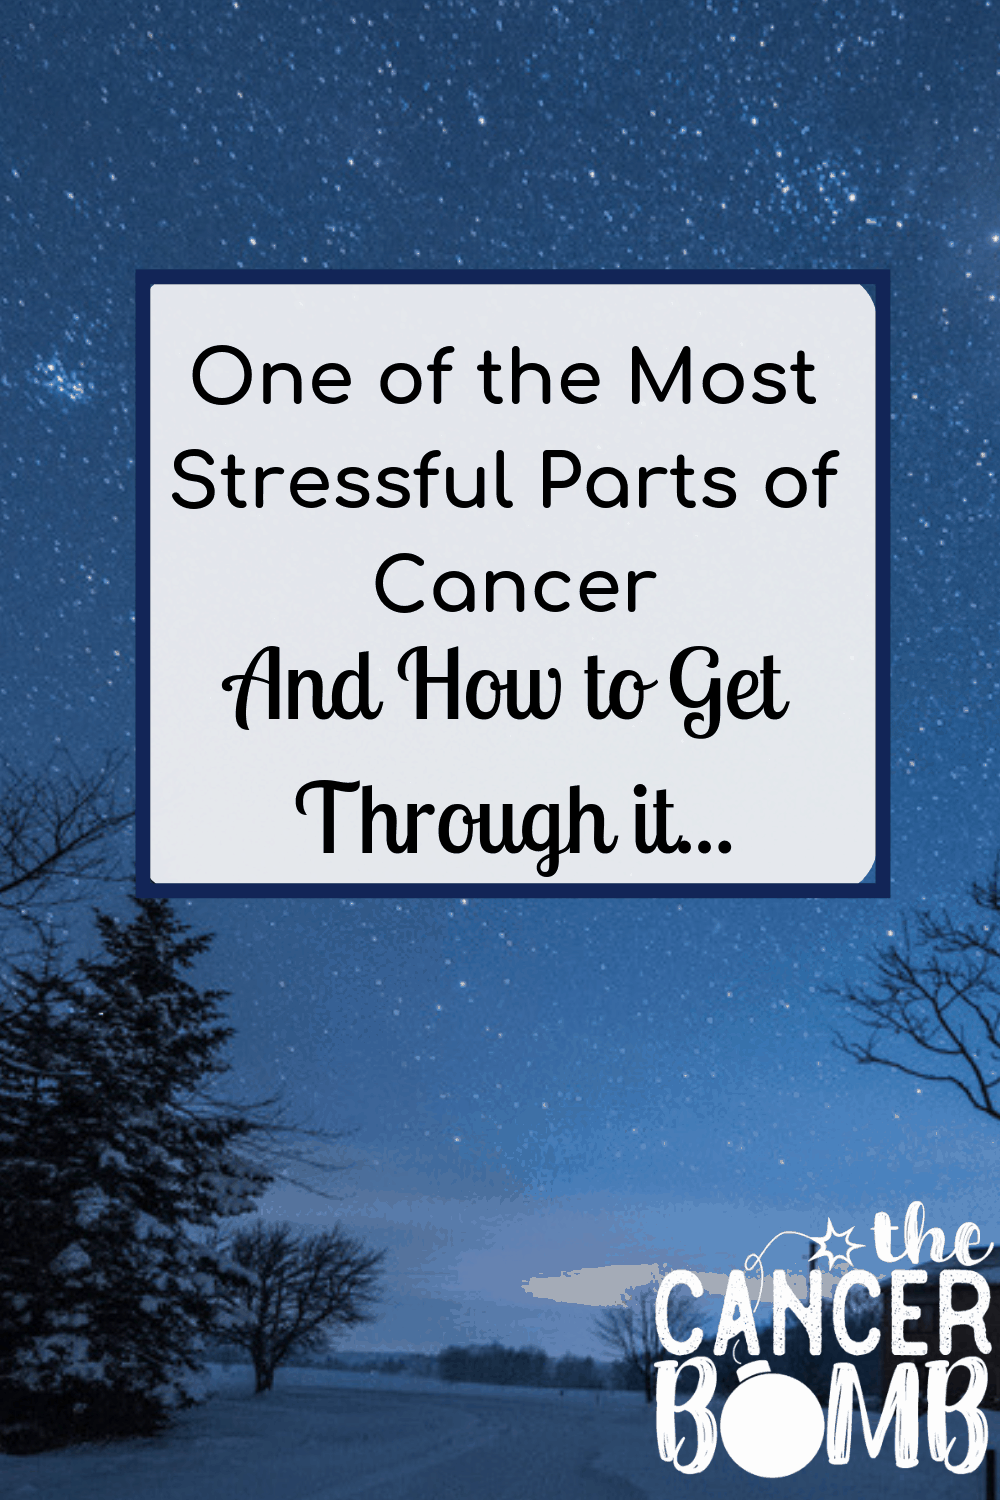 One of the most stressful parts of cancer, and how to get through it. We just got started and I swear I’ve already figured out the most stressful part of cancer! Here we are anticipating all the bad news you just know, is coming. How does anyone survive this without going completely insane? 